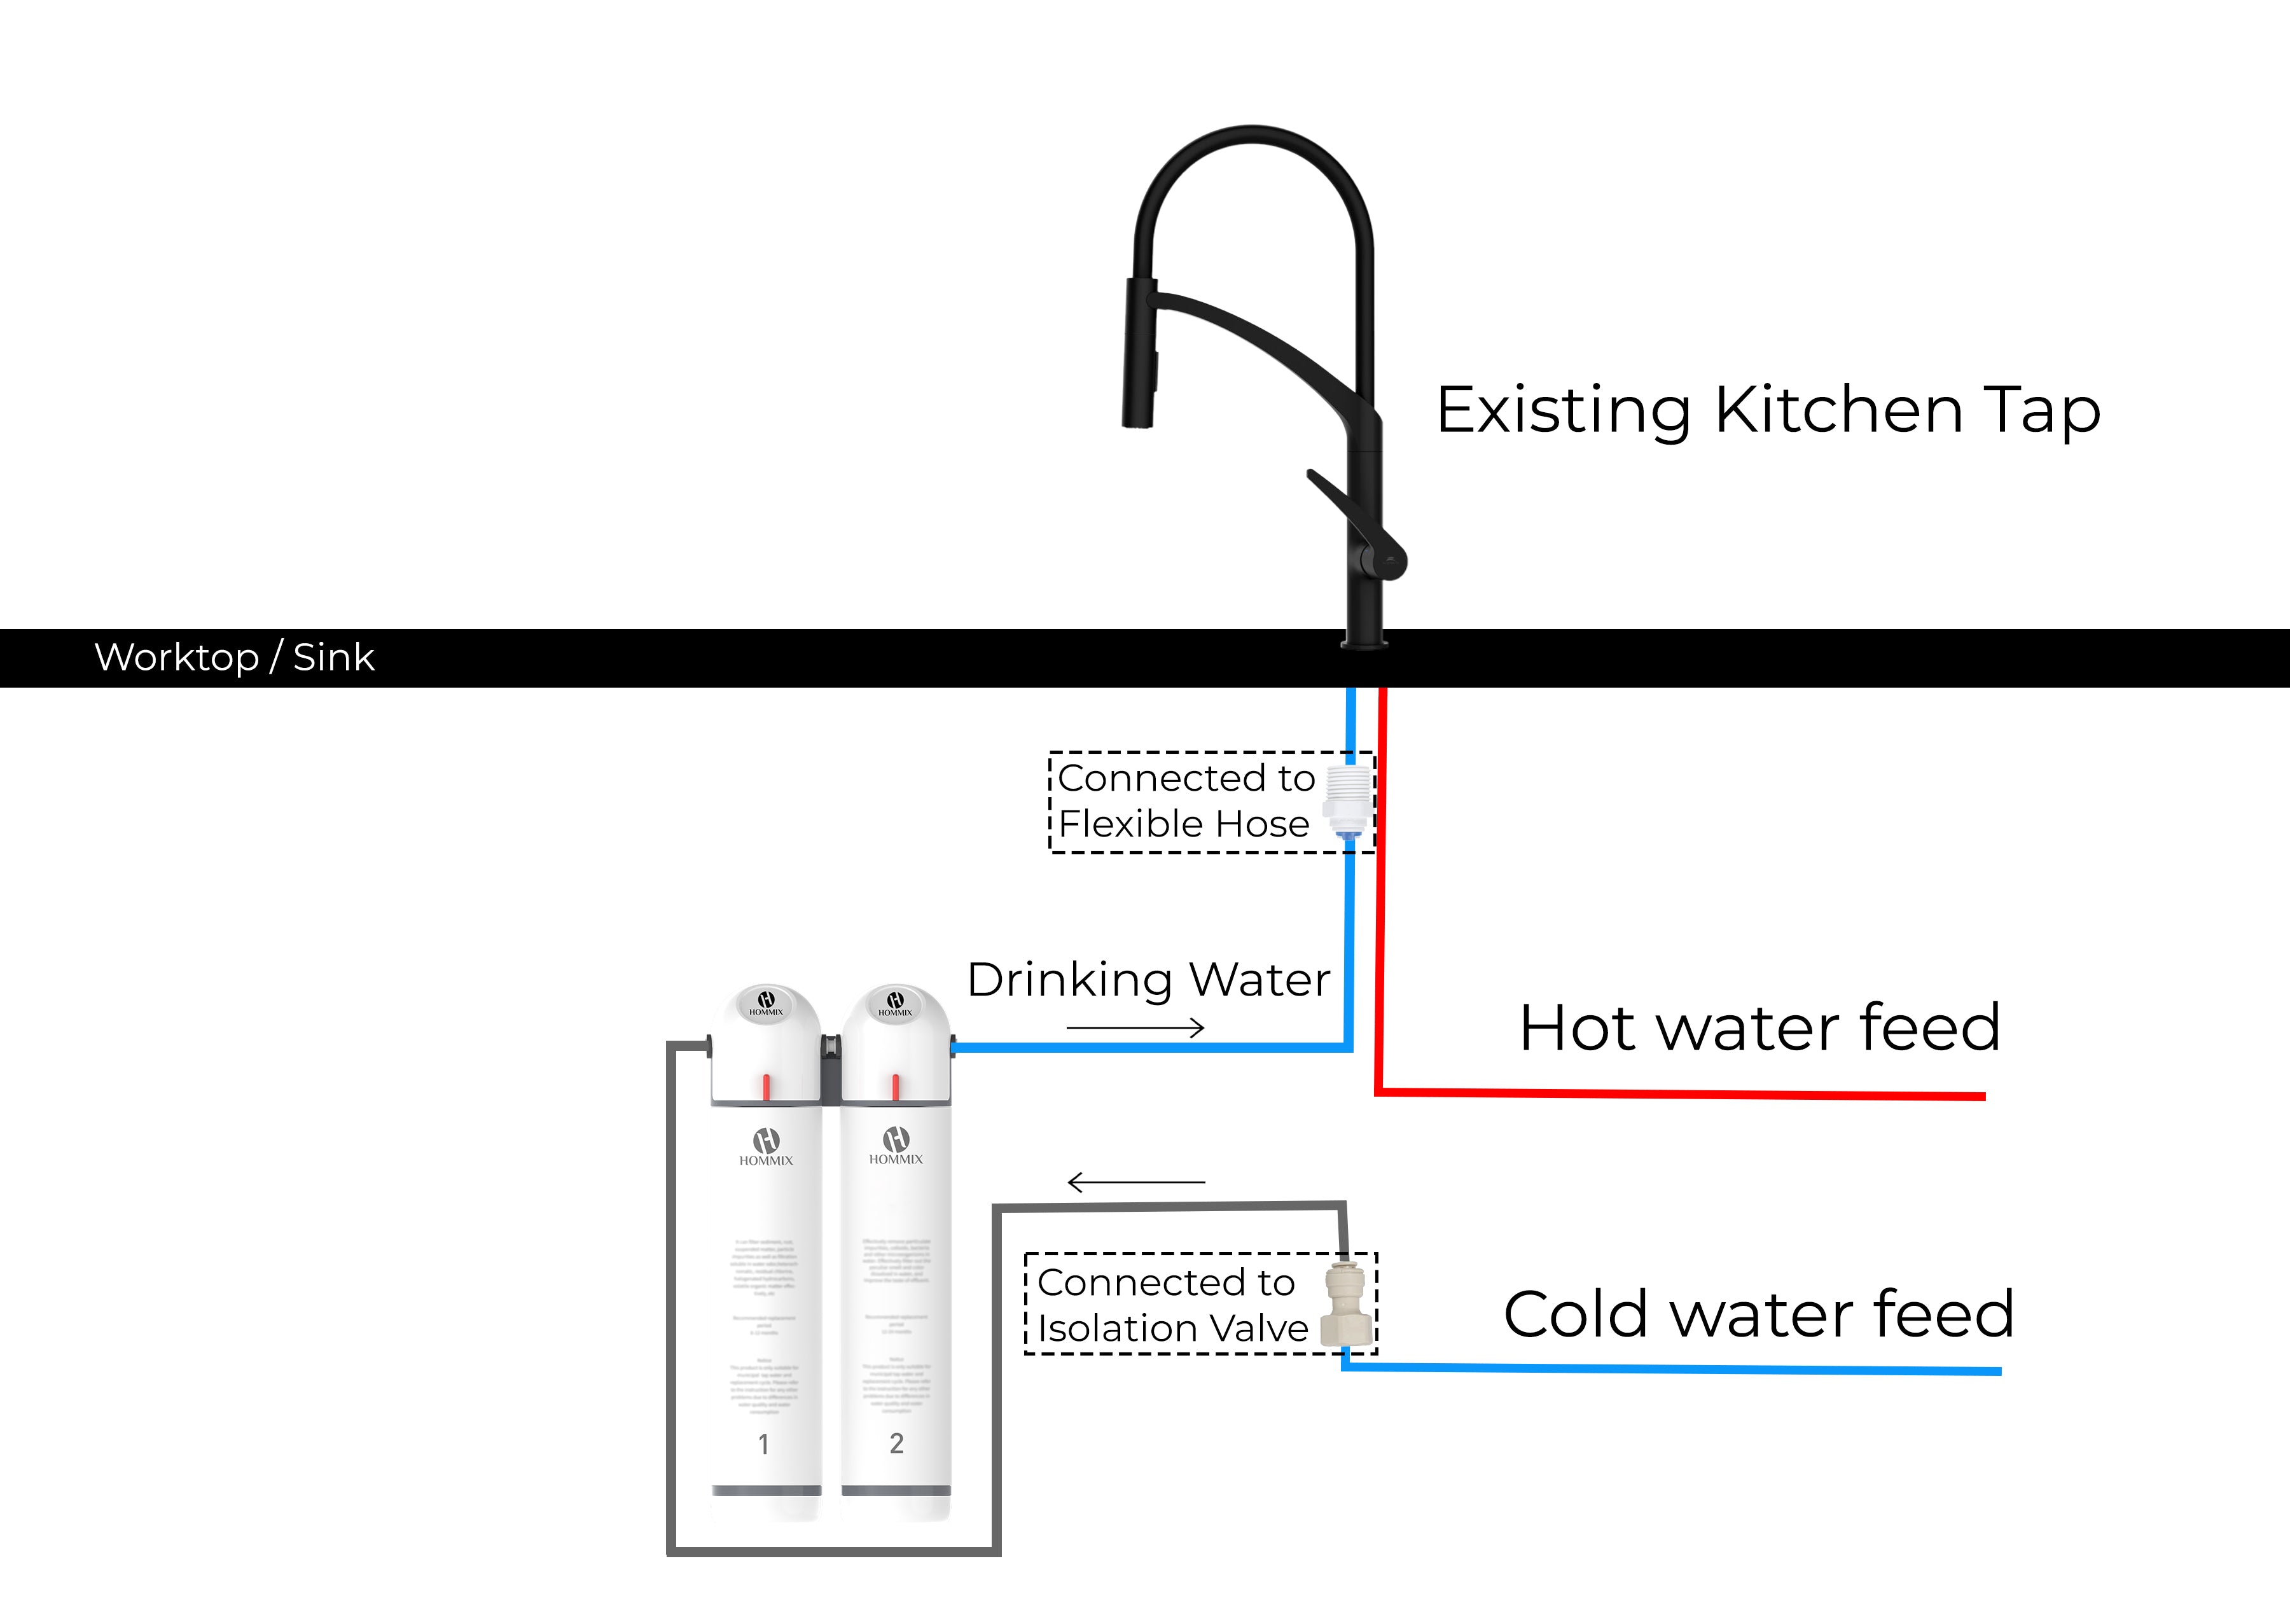 hommix ultra uf ultrafiltration softening water filter - existing kitchen tap installation